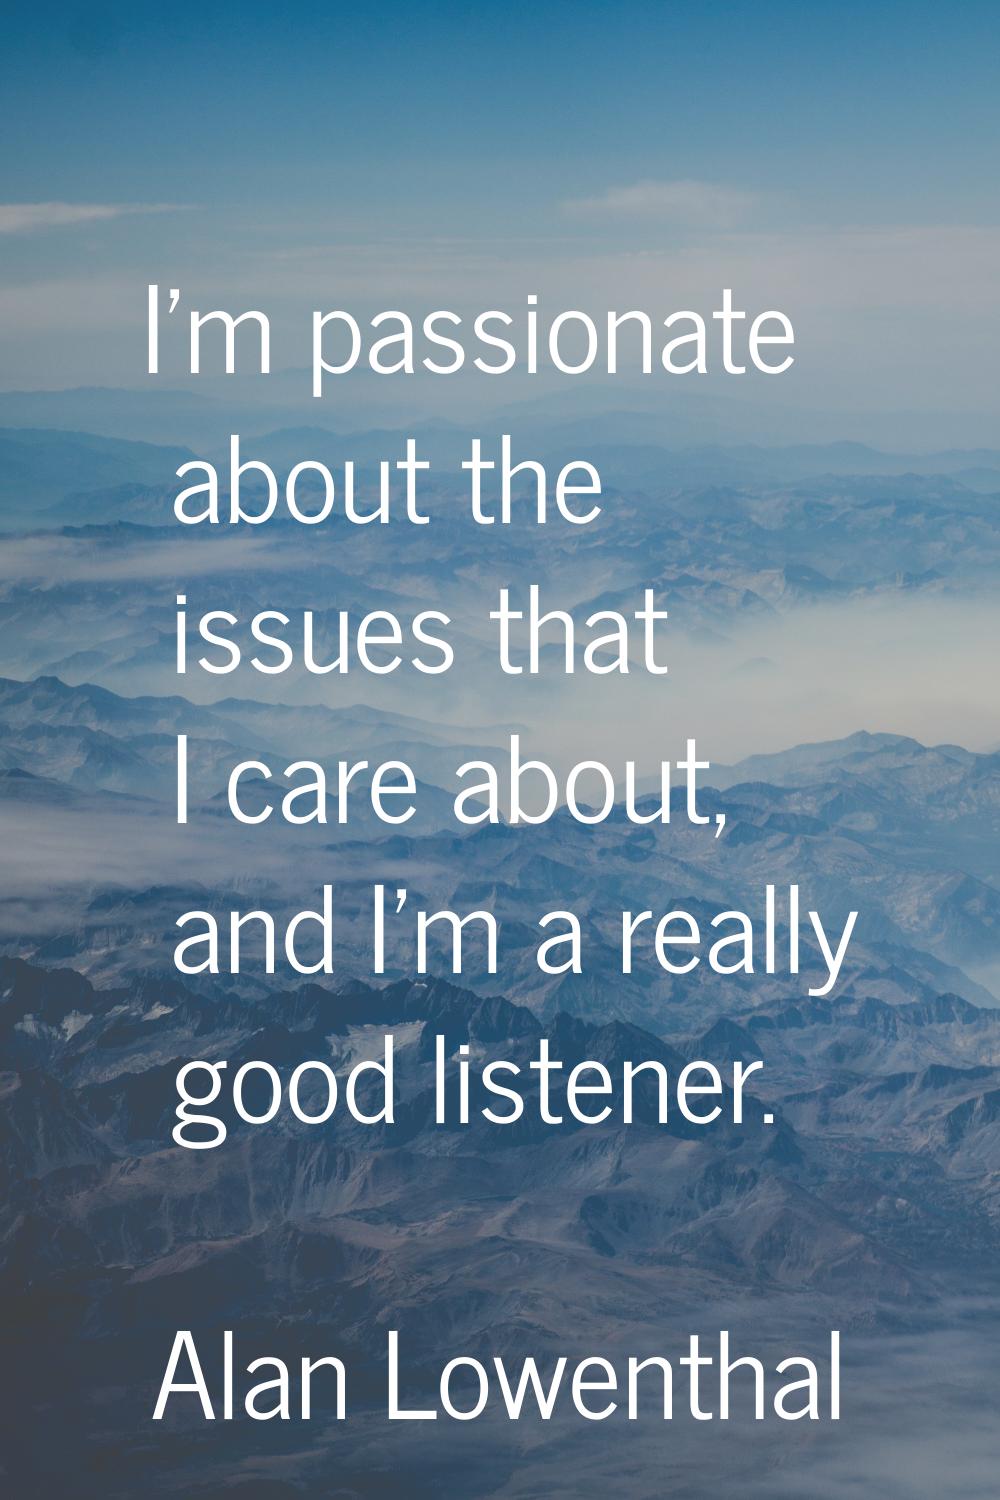 I'm passionate about the issues that I care about, and I'm a really good listener.